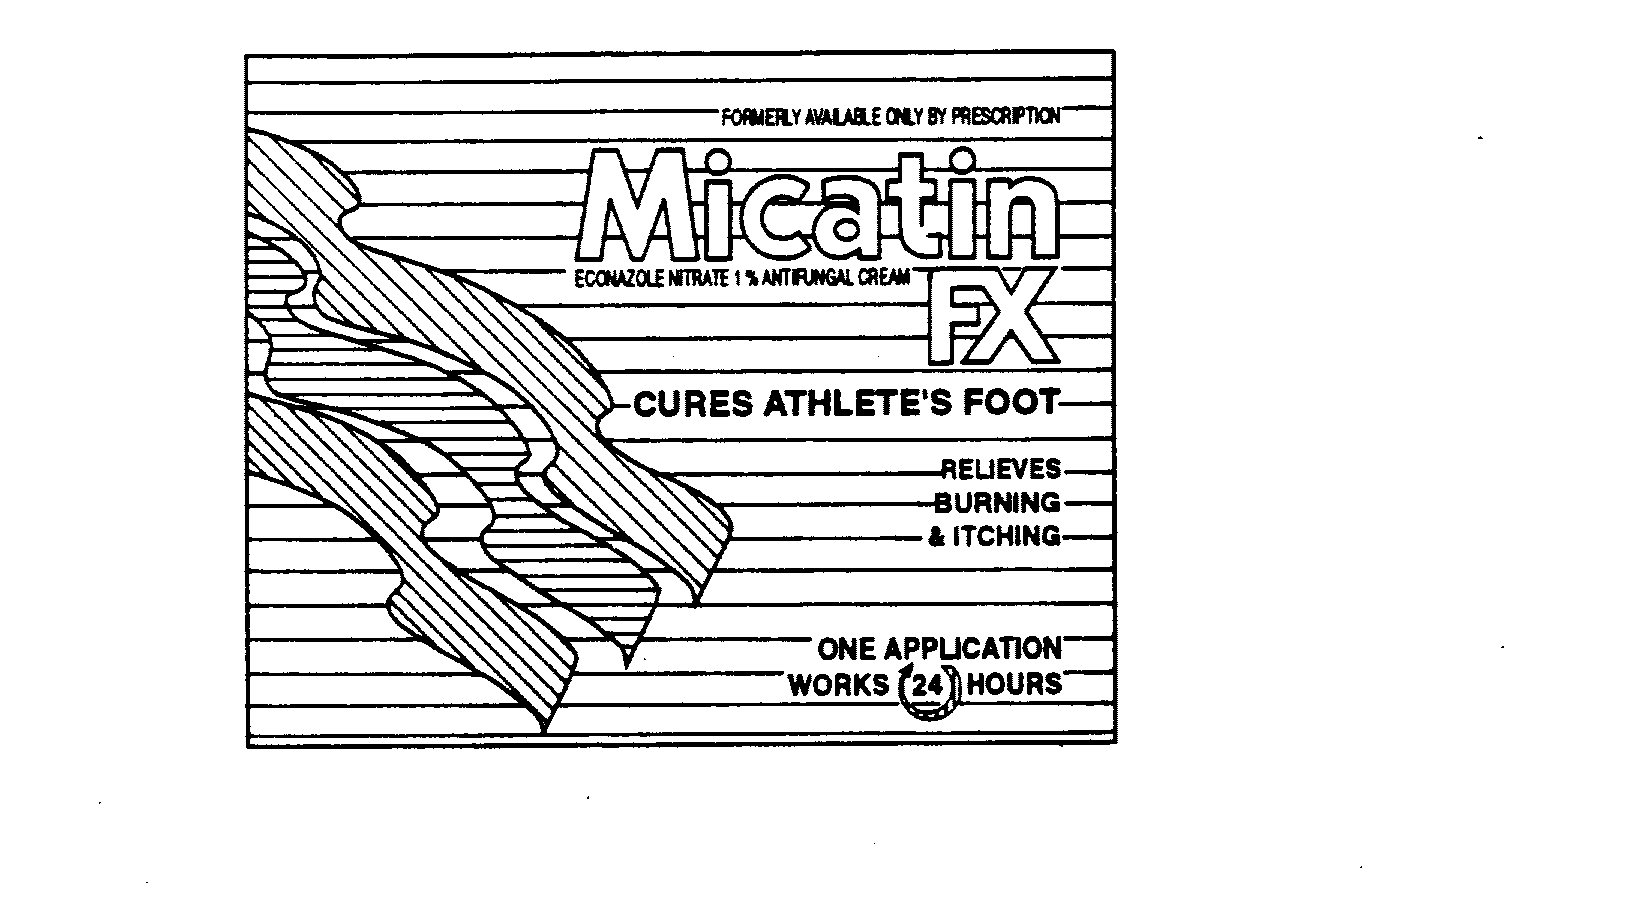  MICATIN FX FORMERLY AVAILABLE ONLY BY PRESCRIPTION ECONAZOLE NITRATE 1% ANTIFUNGAL CREAM CURES ATHLETE'S FOOT RELIEVES BURNING &